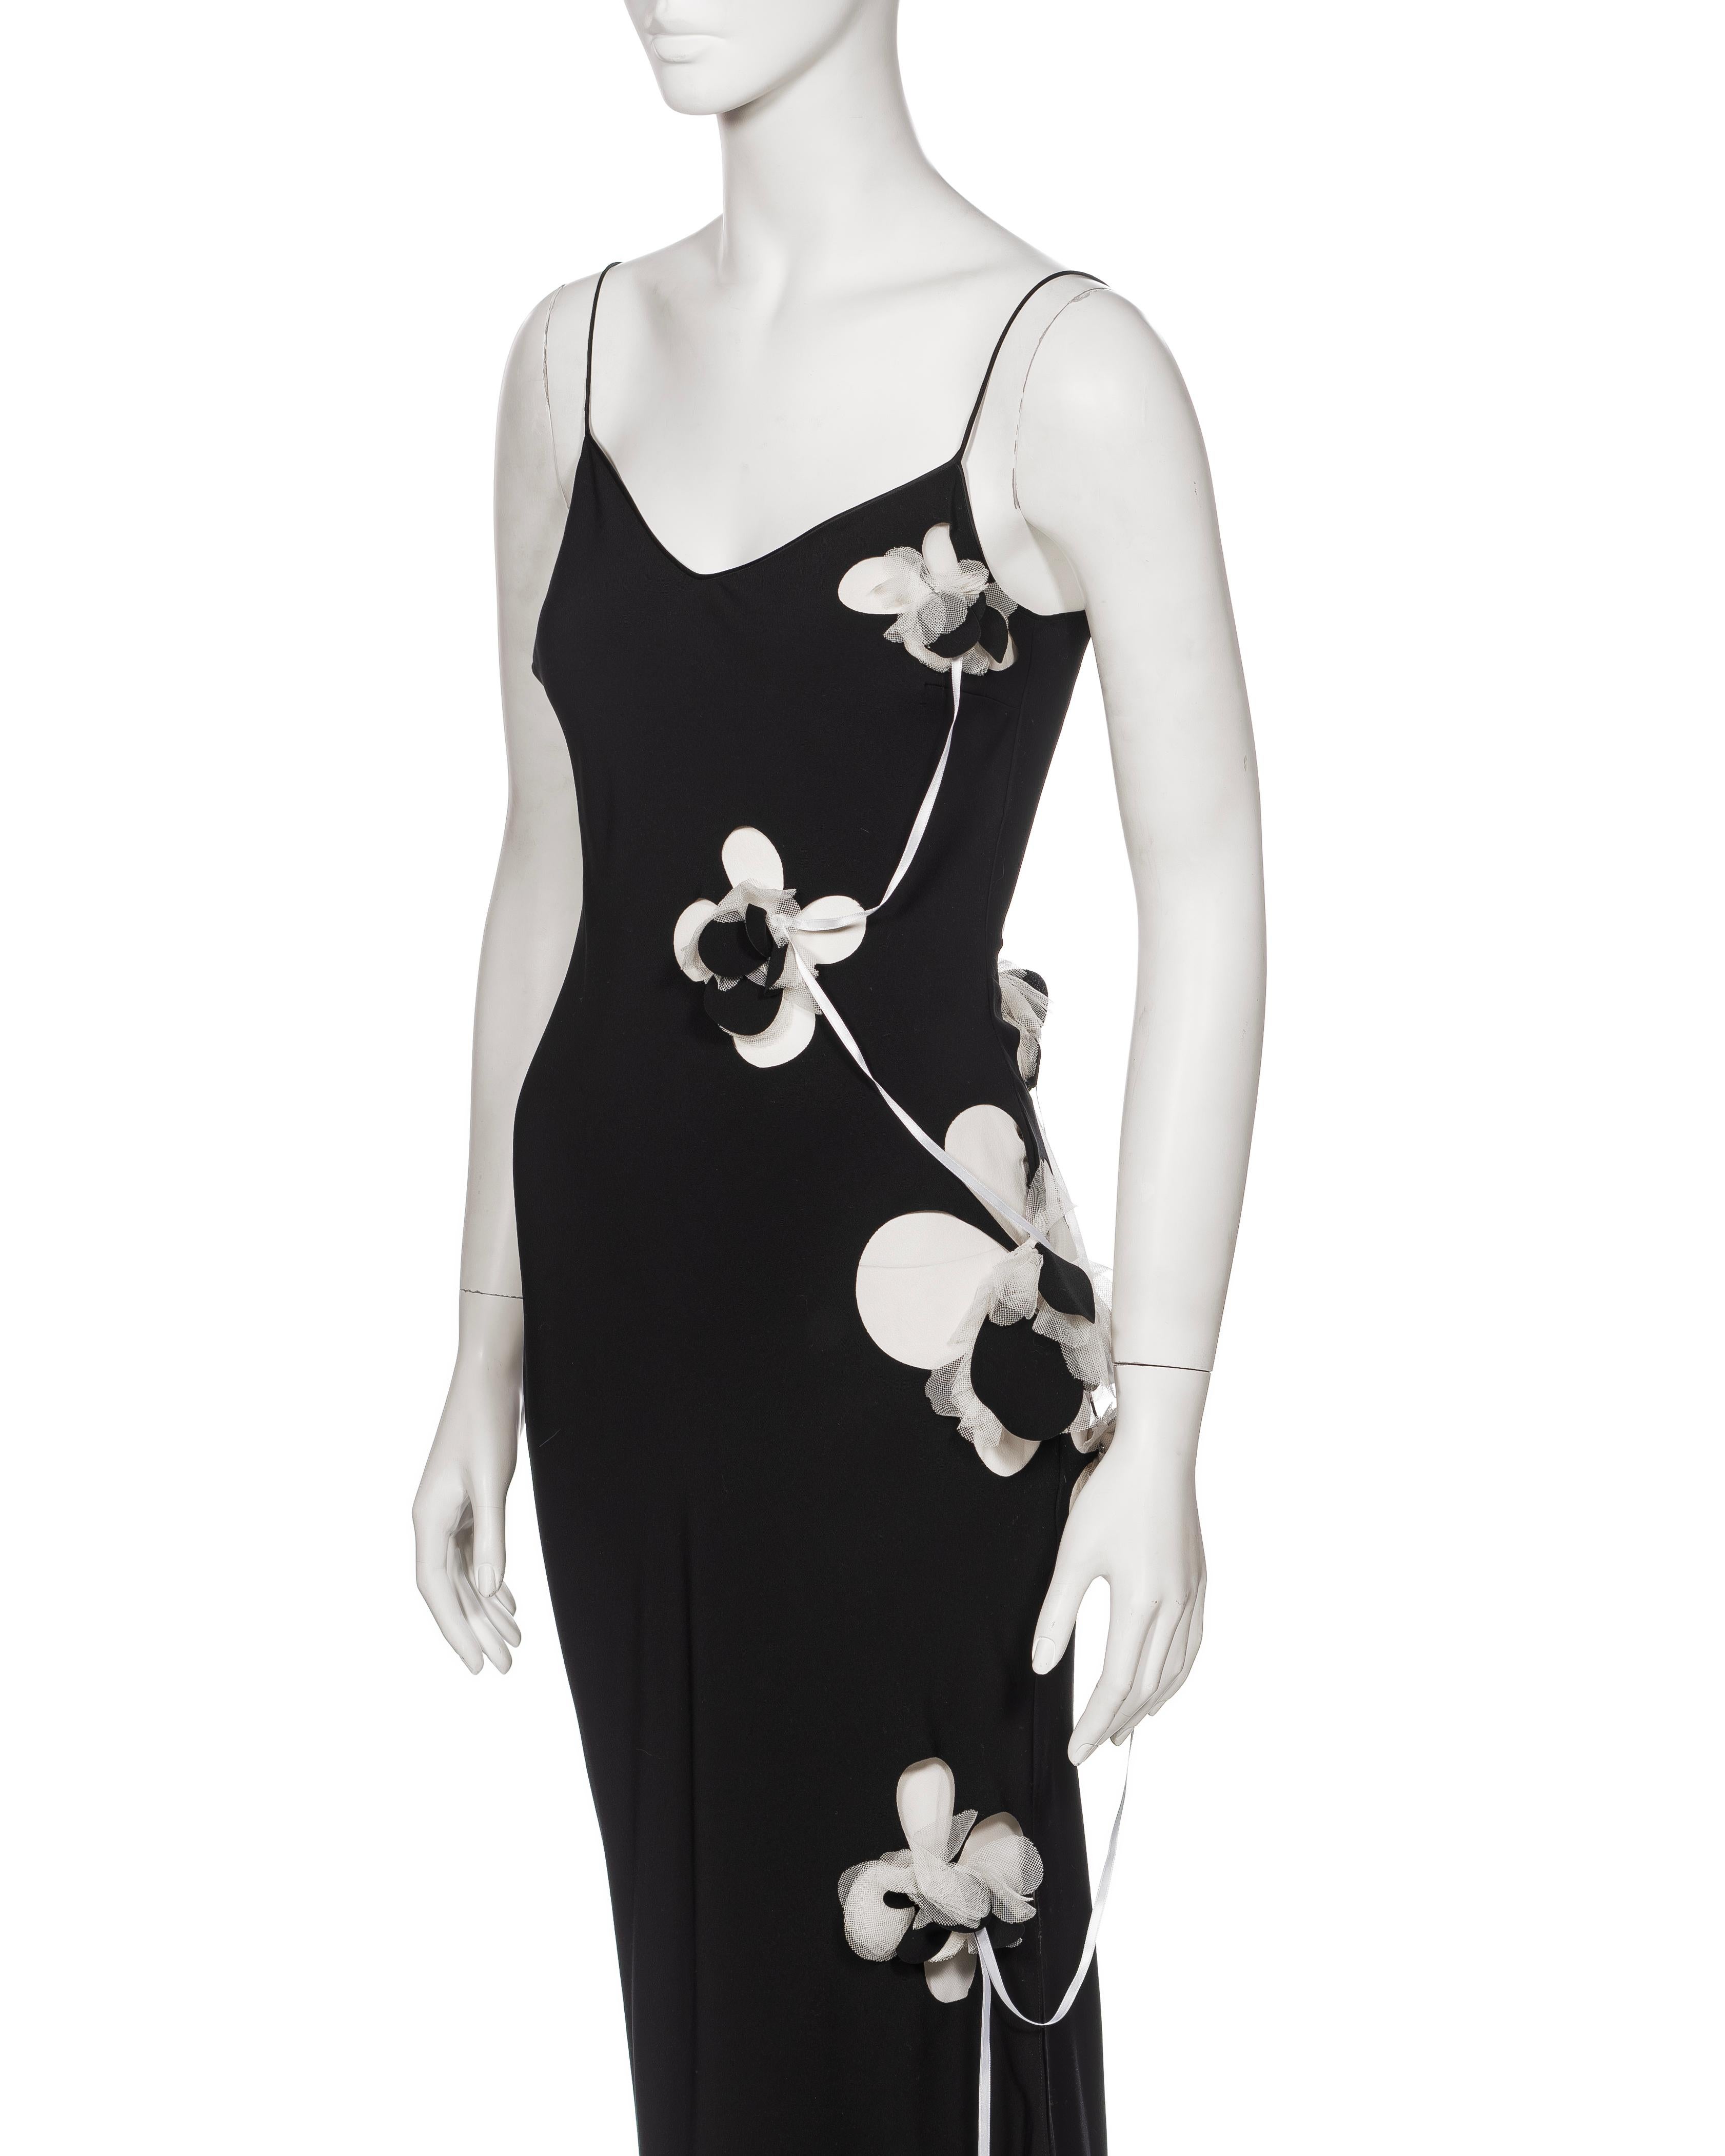 John Galliano Black Silk Slip Dress with Floral Appliqués and Ribbons, FW 2001 For Sale 1